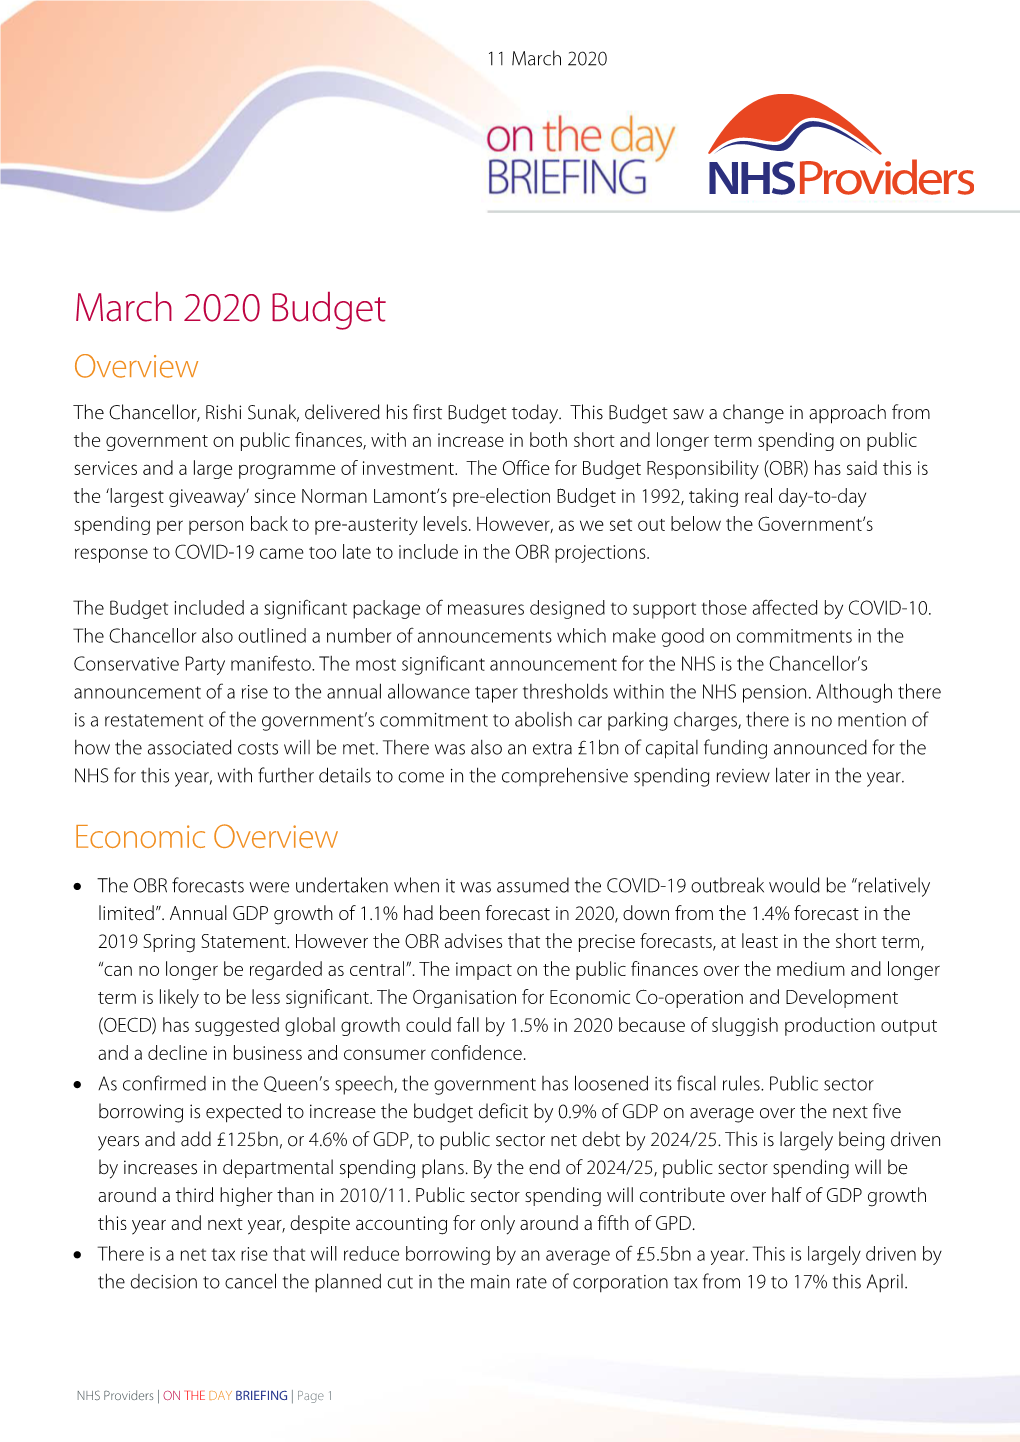 March 2020 Budget Overview the Chancellor, Rishi Sunak, Delivered His First Budget Today